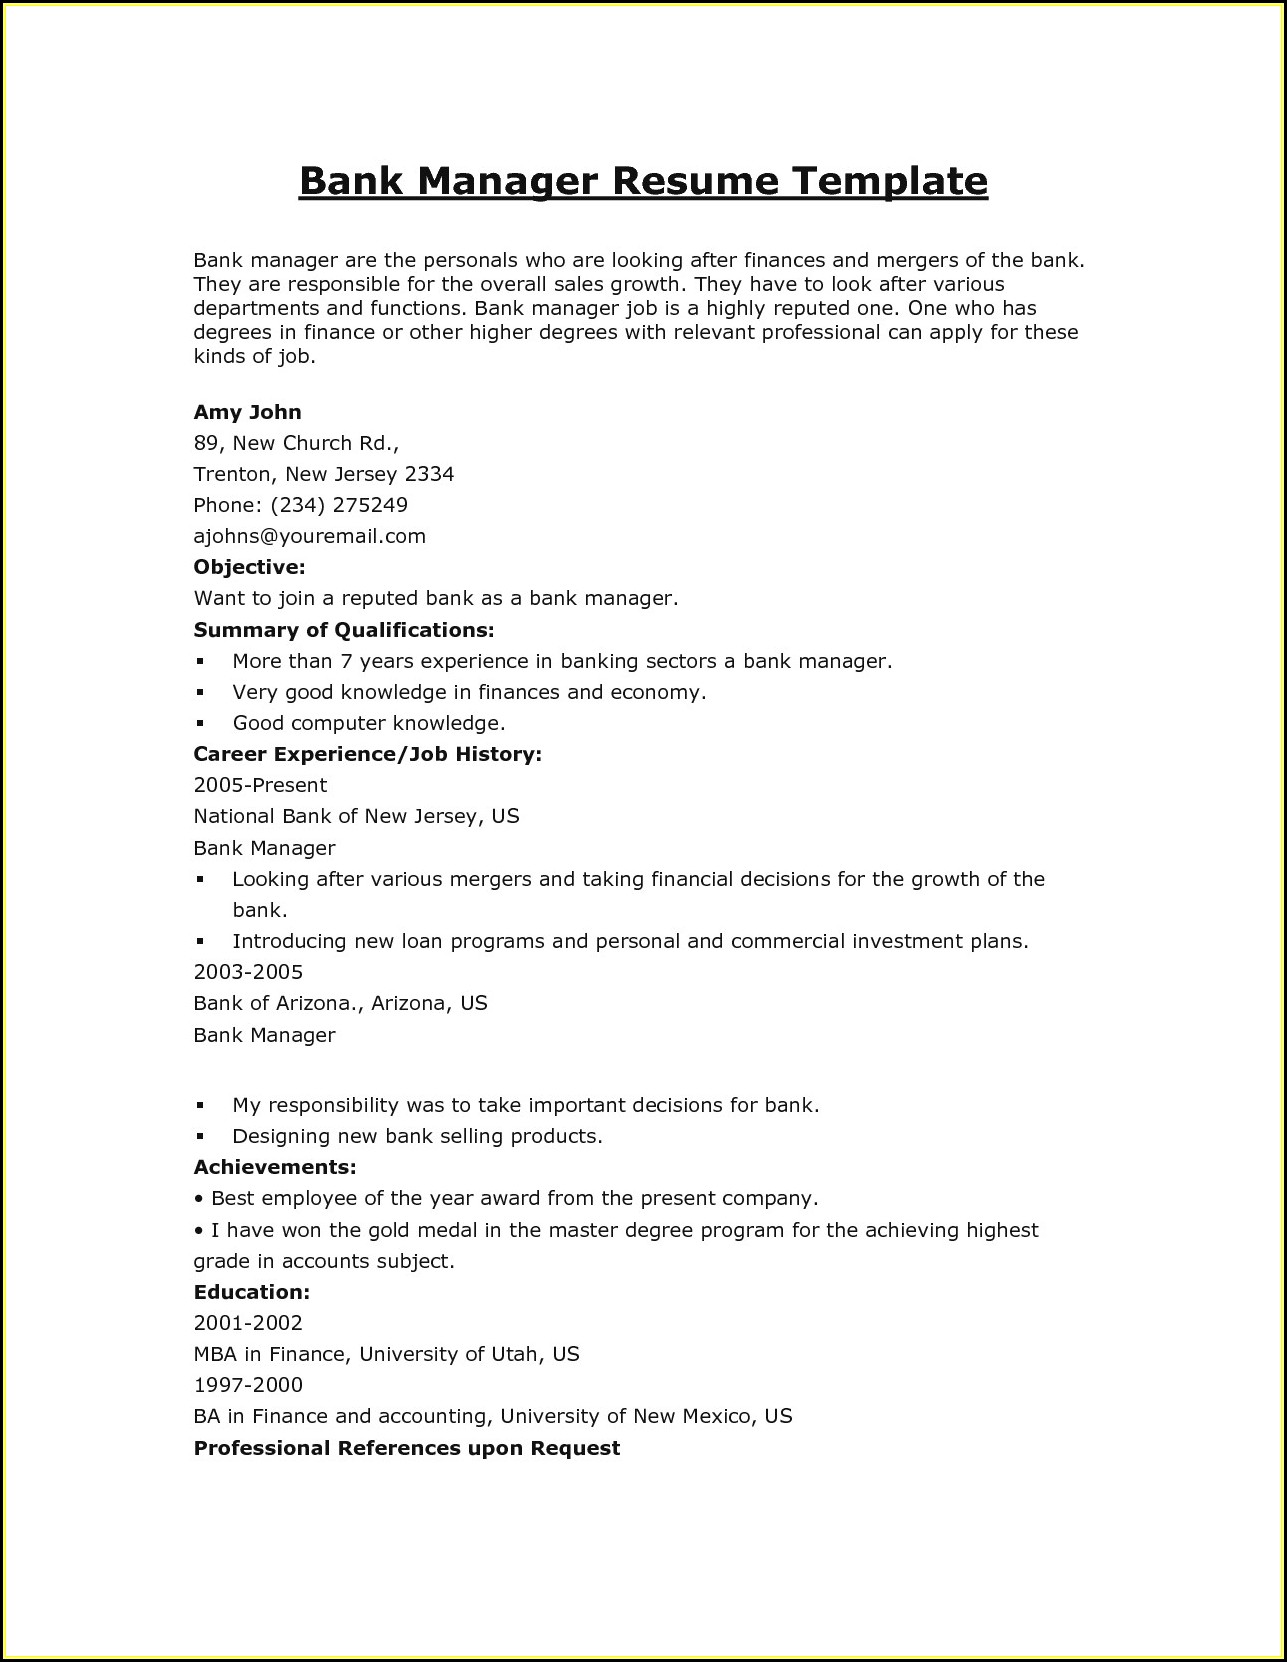 Resume Samples For Banking Jobs In India